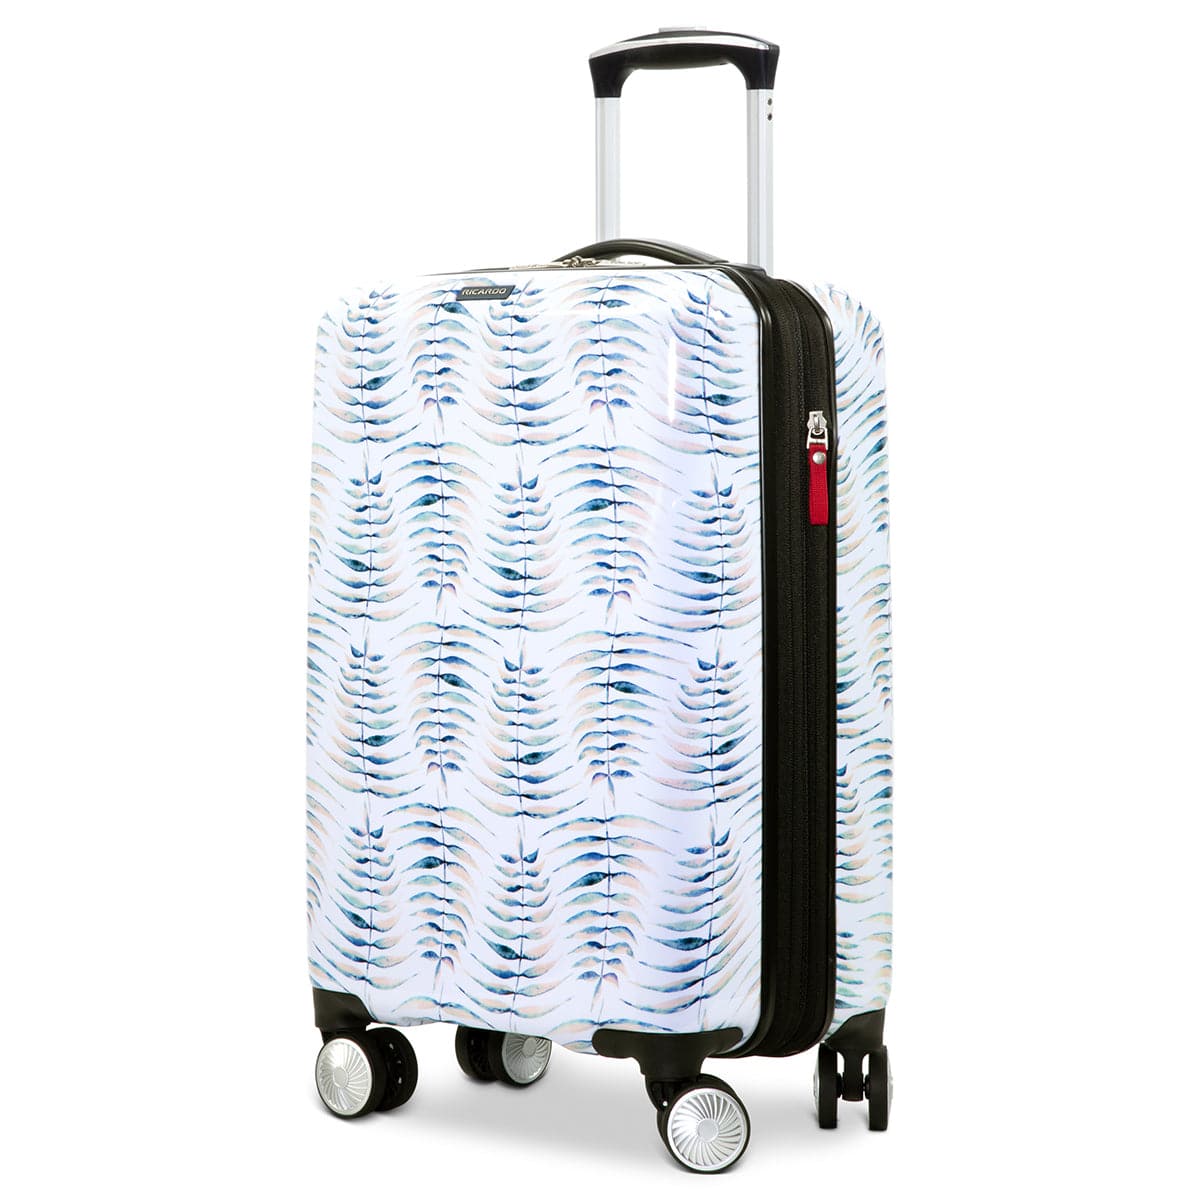 Ricardo Beverly Hills Florence 2.0 Hard Side Carry-On Luggage